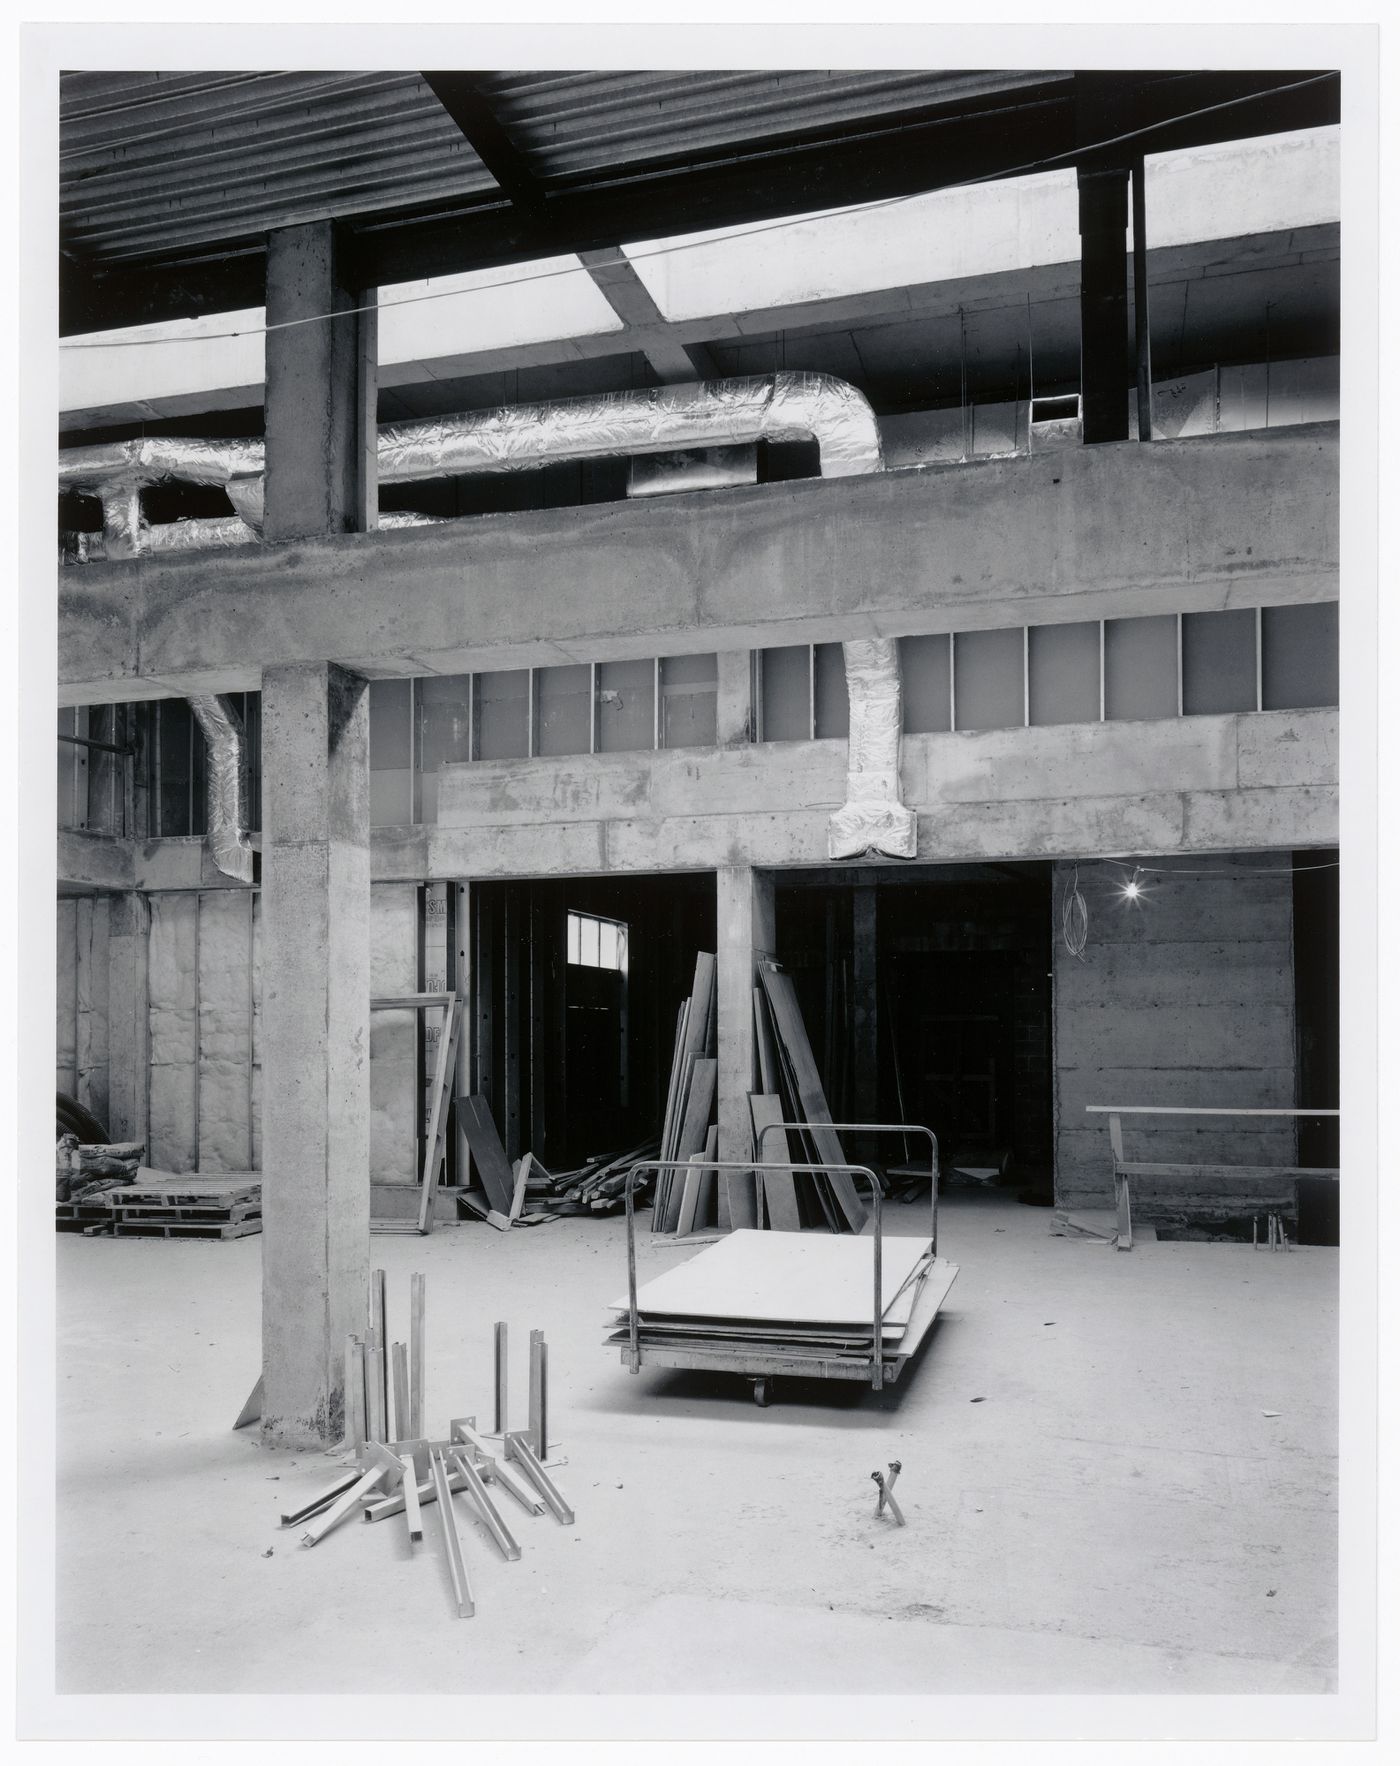 Interior view of the Entrance Court showing a column, air ducts, and a wheelbarrow with building materials, Canadian Centre for Architecture under construction, Montréal, Québec